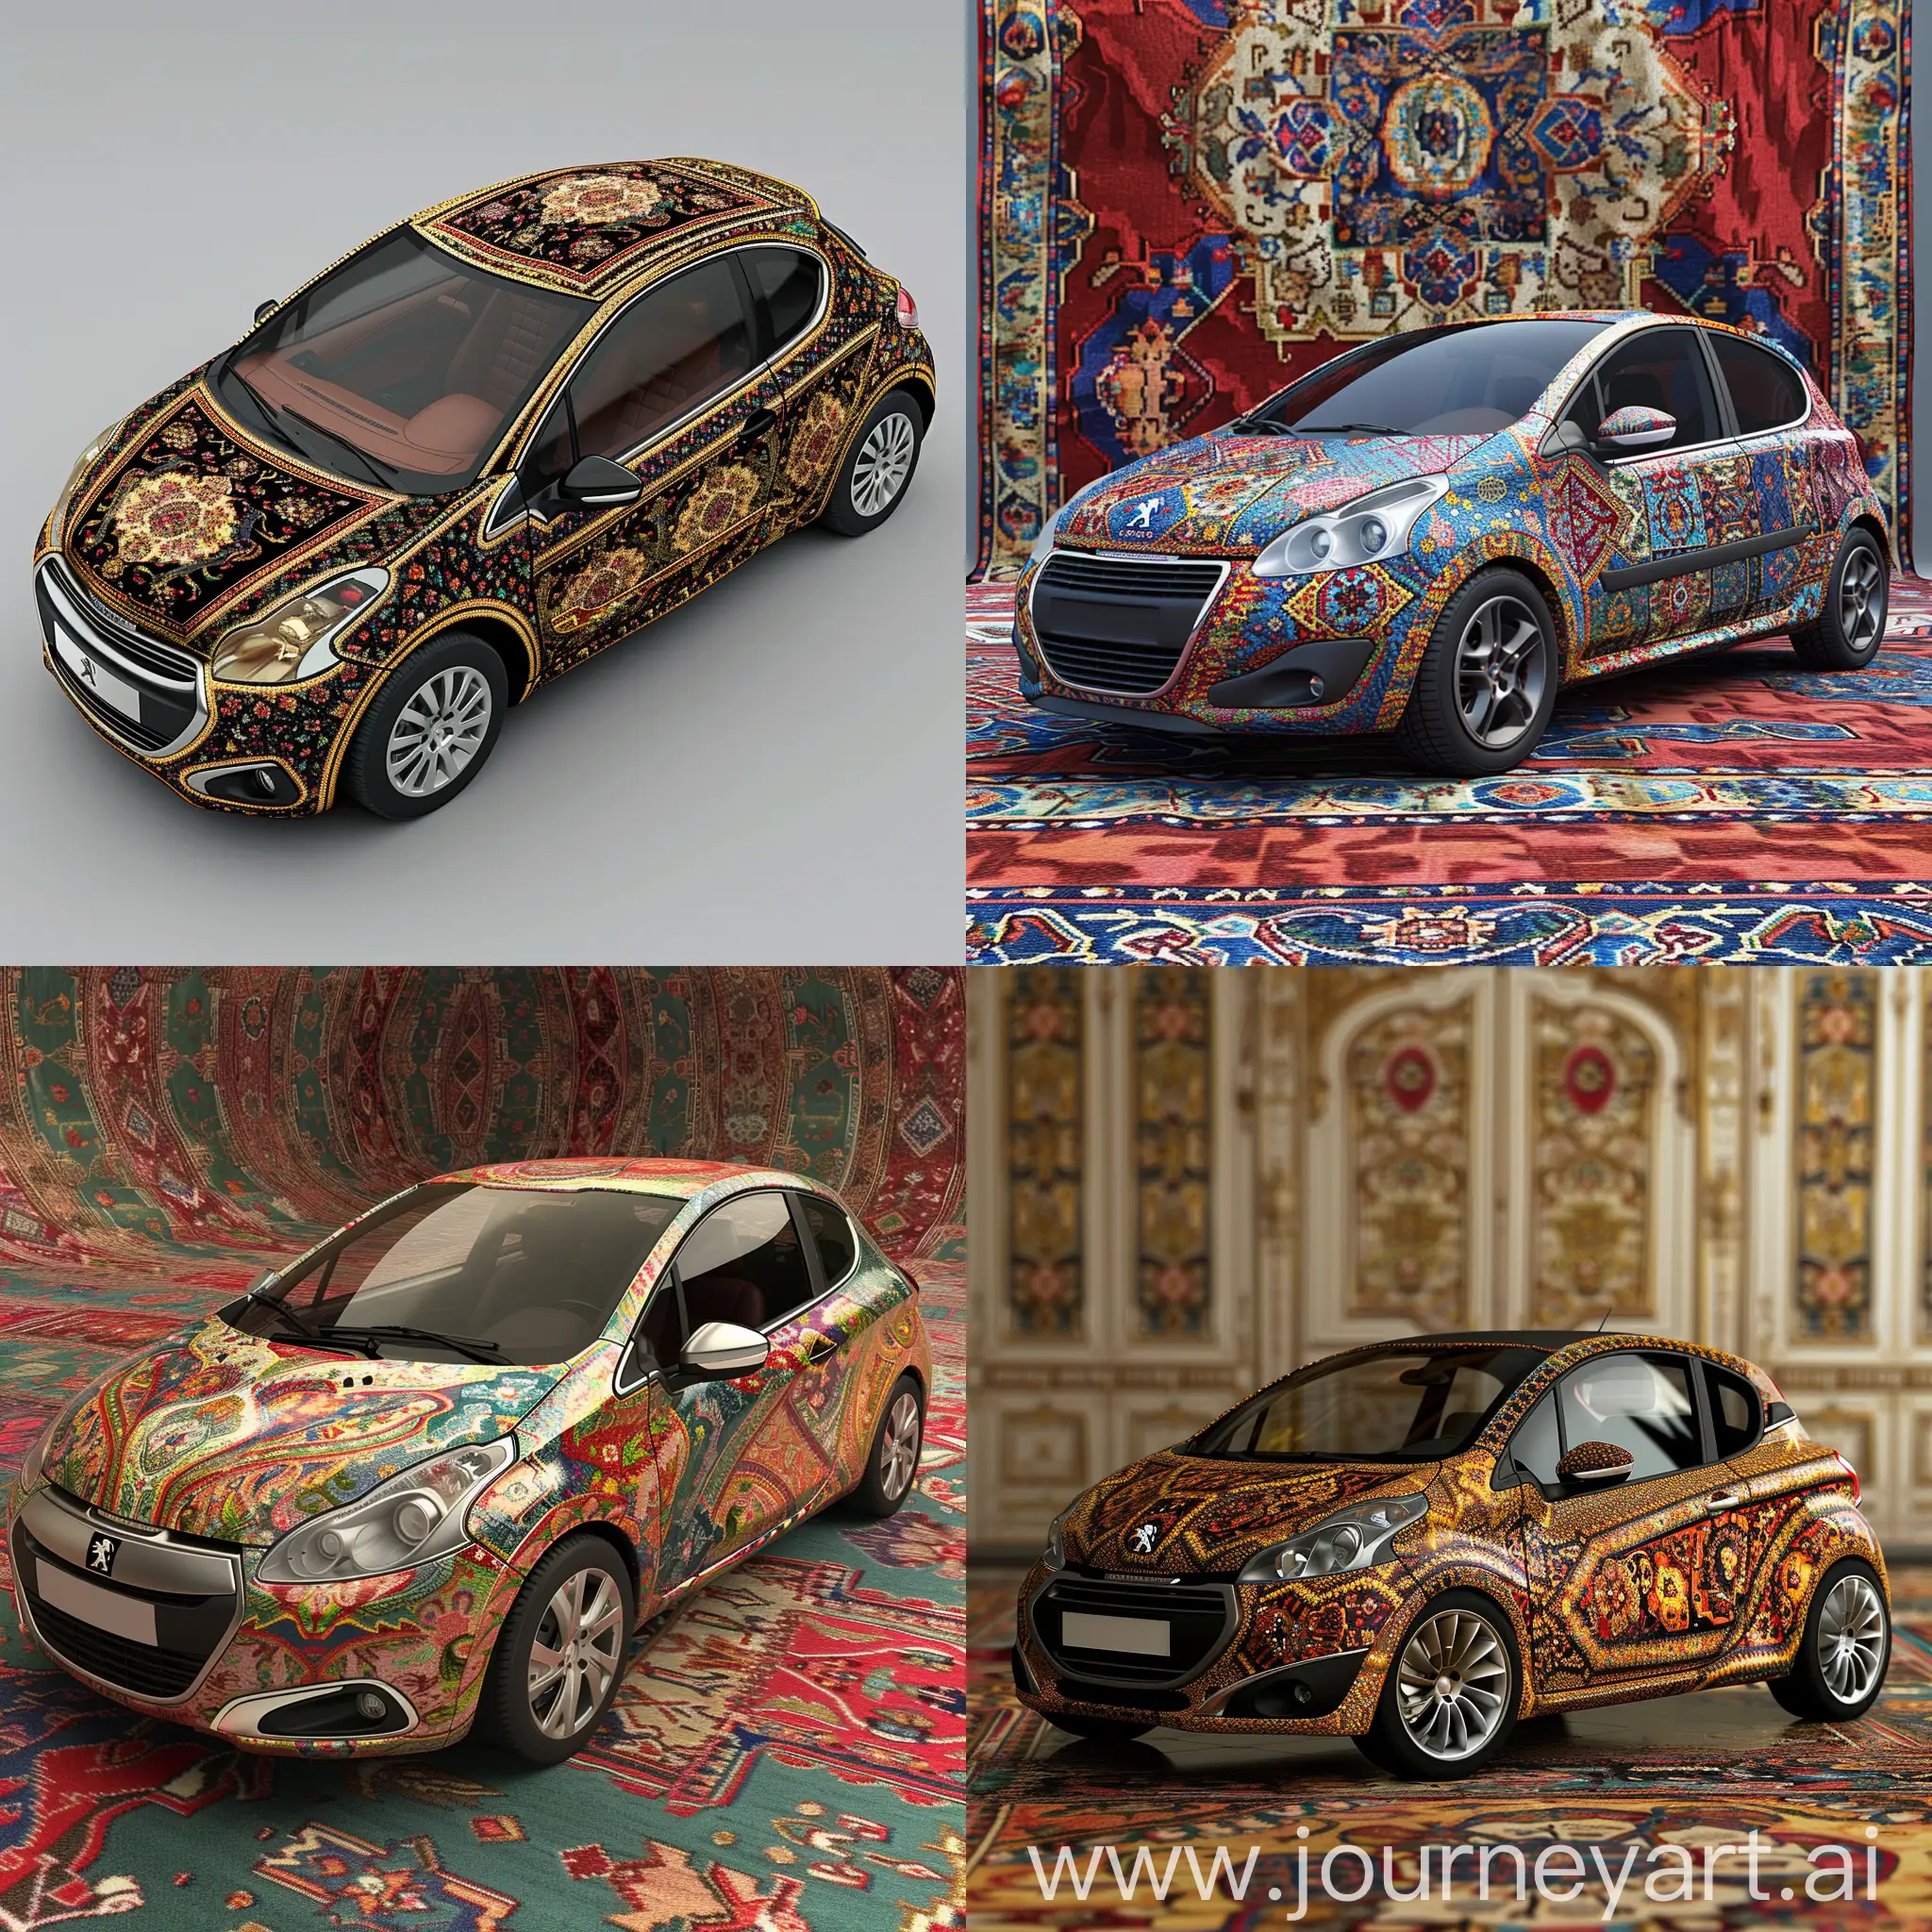 Peugeot-207-Car-with-Iranian-Carpet-Design-on-Natural-Background